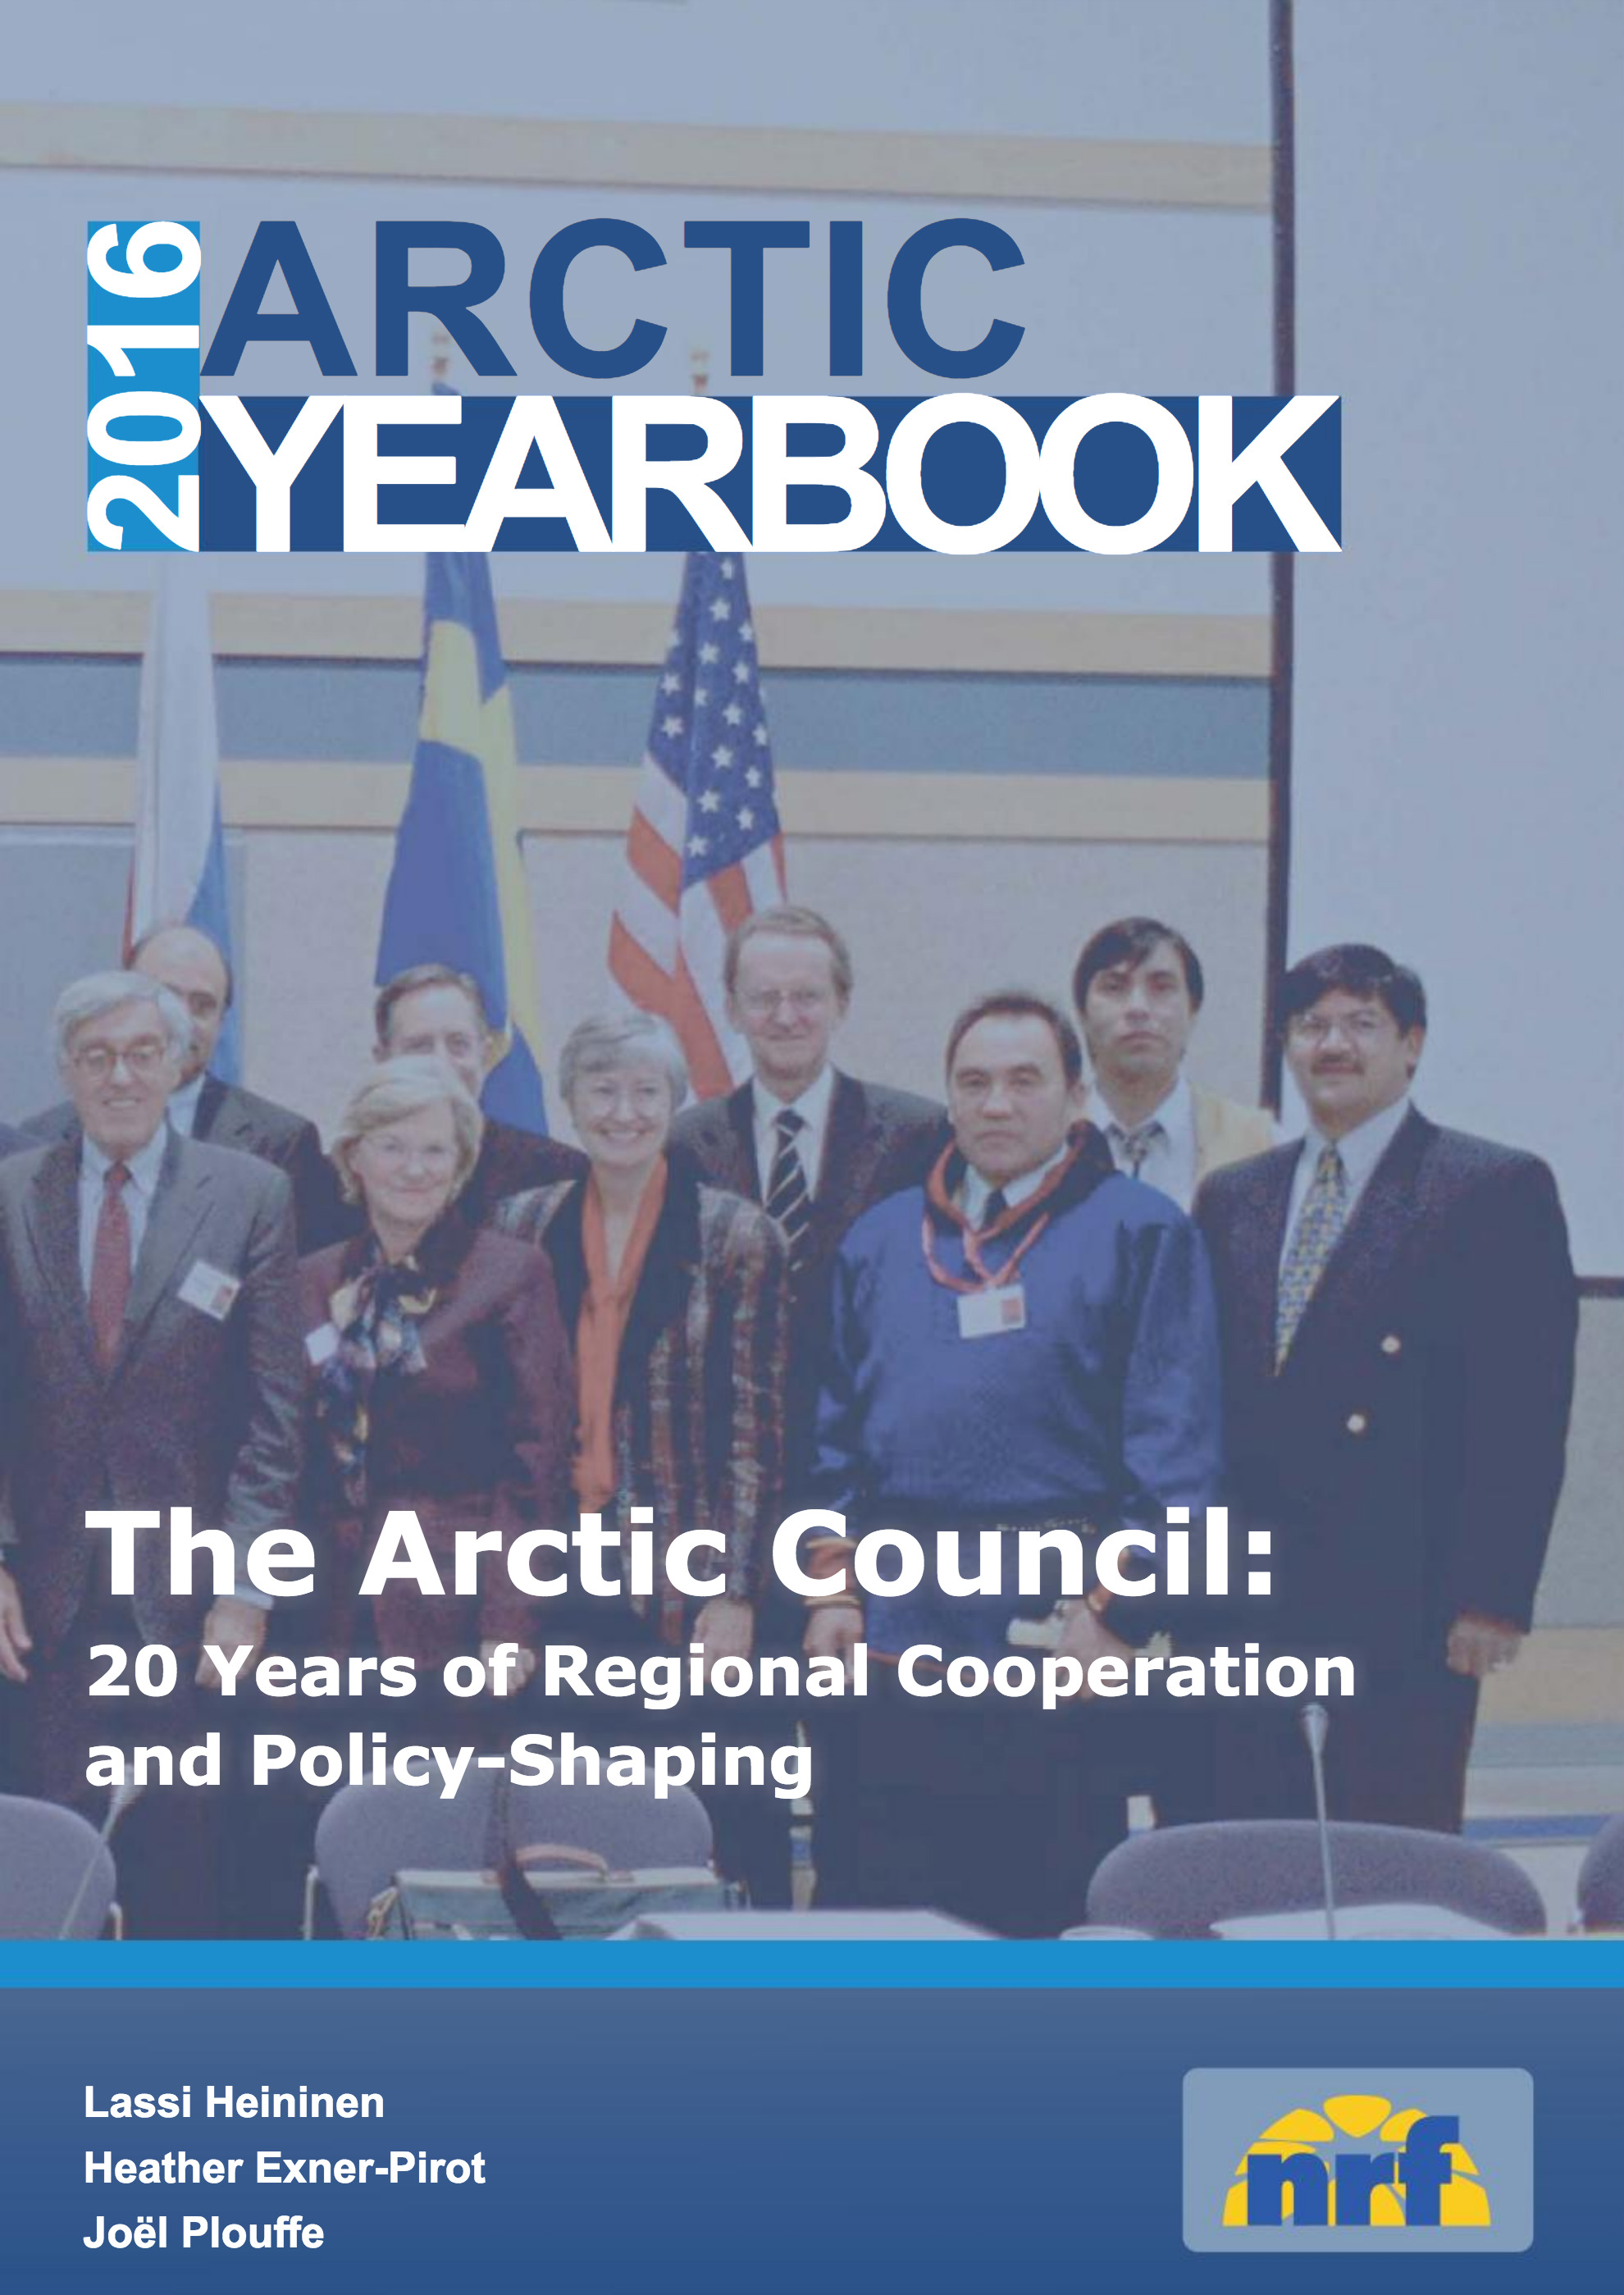 The cover of the 2016 Arctic Yearbook. This year's edition, the fifth, focuses on the Arctic Council's first two decades.